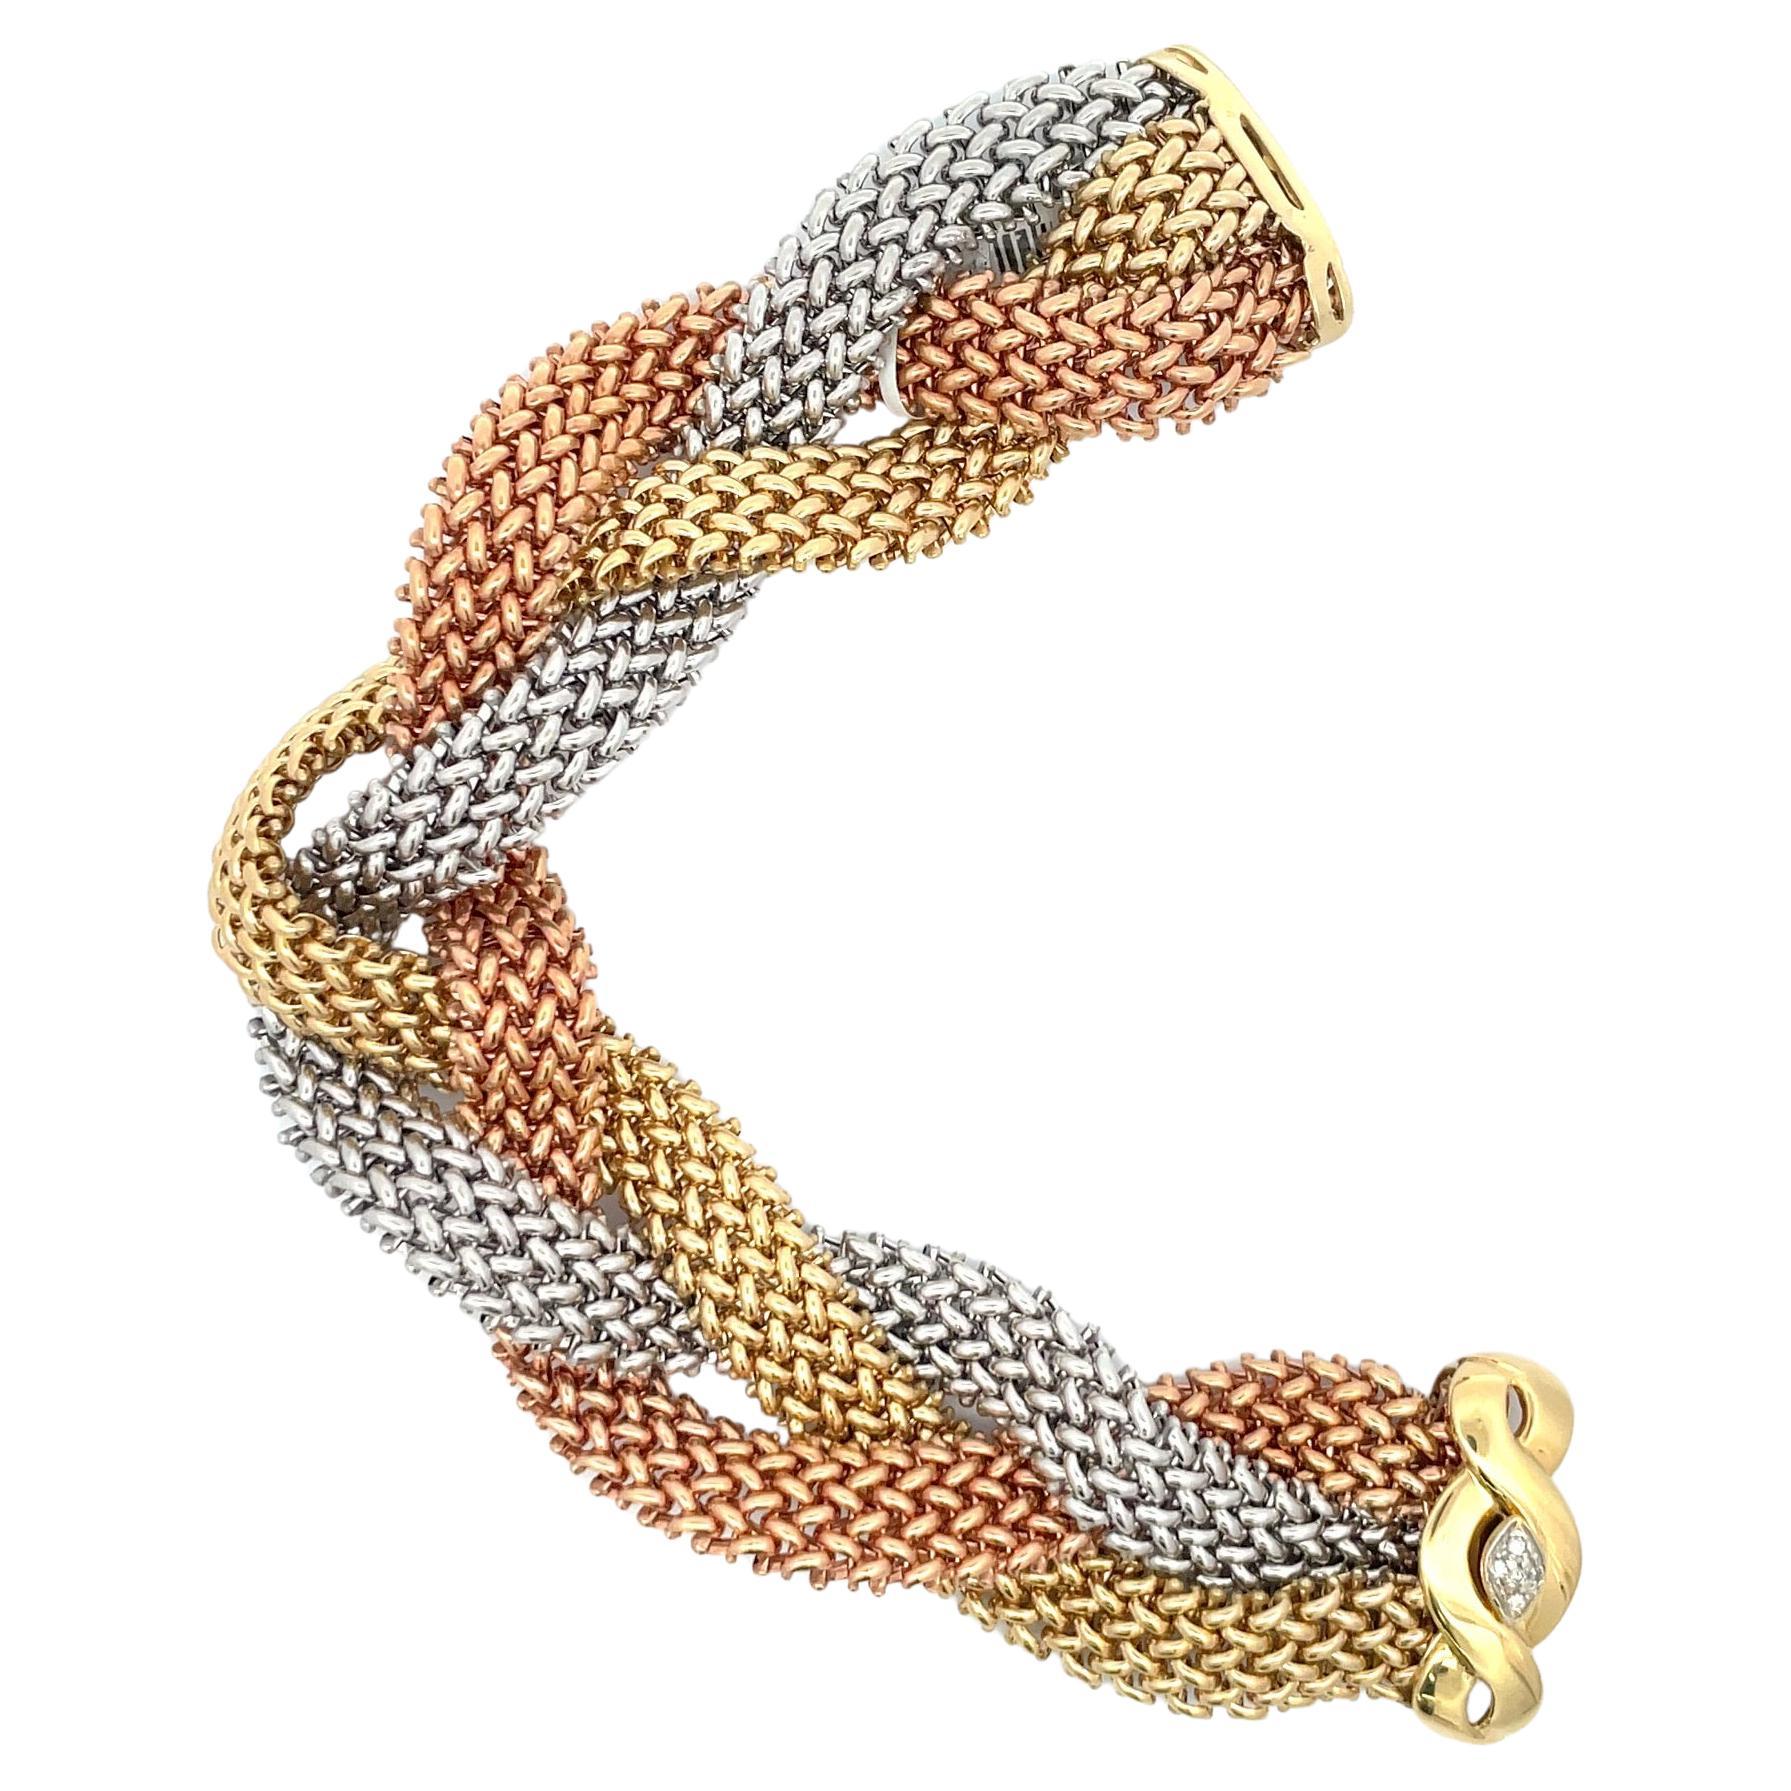 Tri-Color Yellow, White and Rose gold bracelet featuring a woven motif design and a decorative touch of a diamond clasp, 0.10 carats. 42.6 Grams 